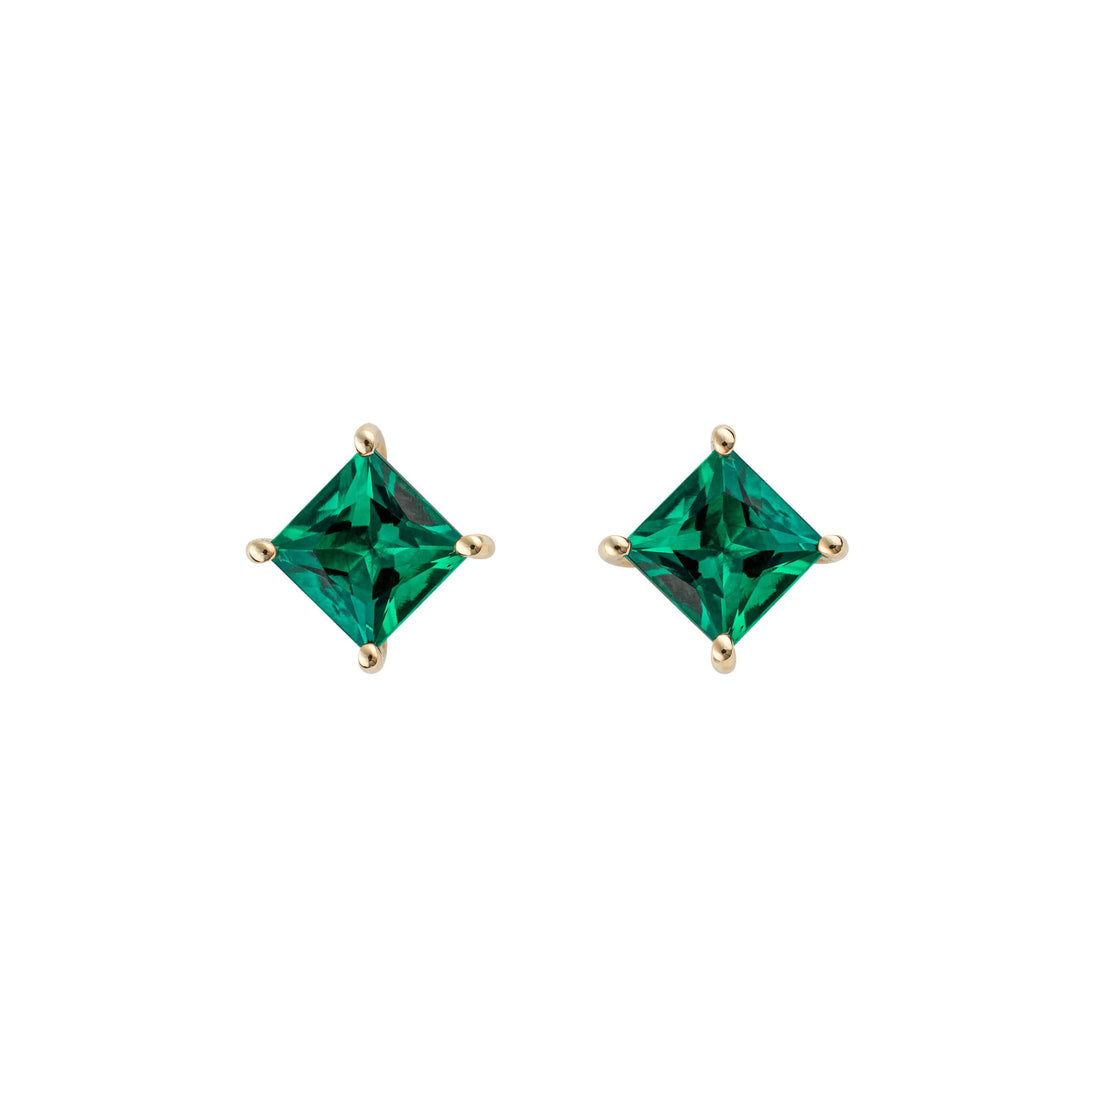 Princess Cut Stud Earrings with Lab Created Emerald in 9ct Yellow Gold - Robert Anthony Jewellers, Edinburgh